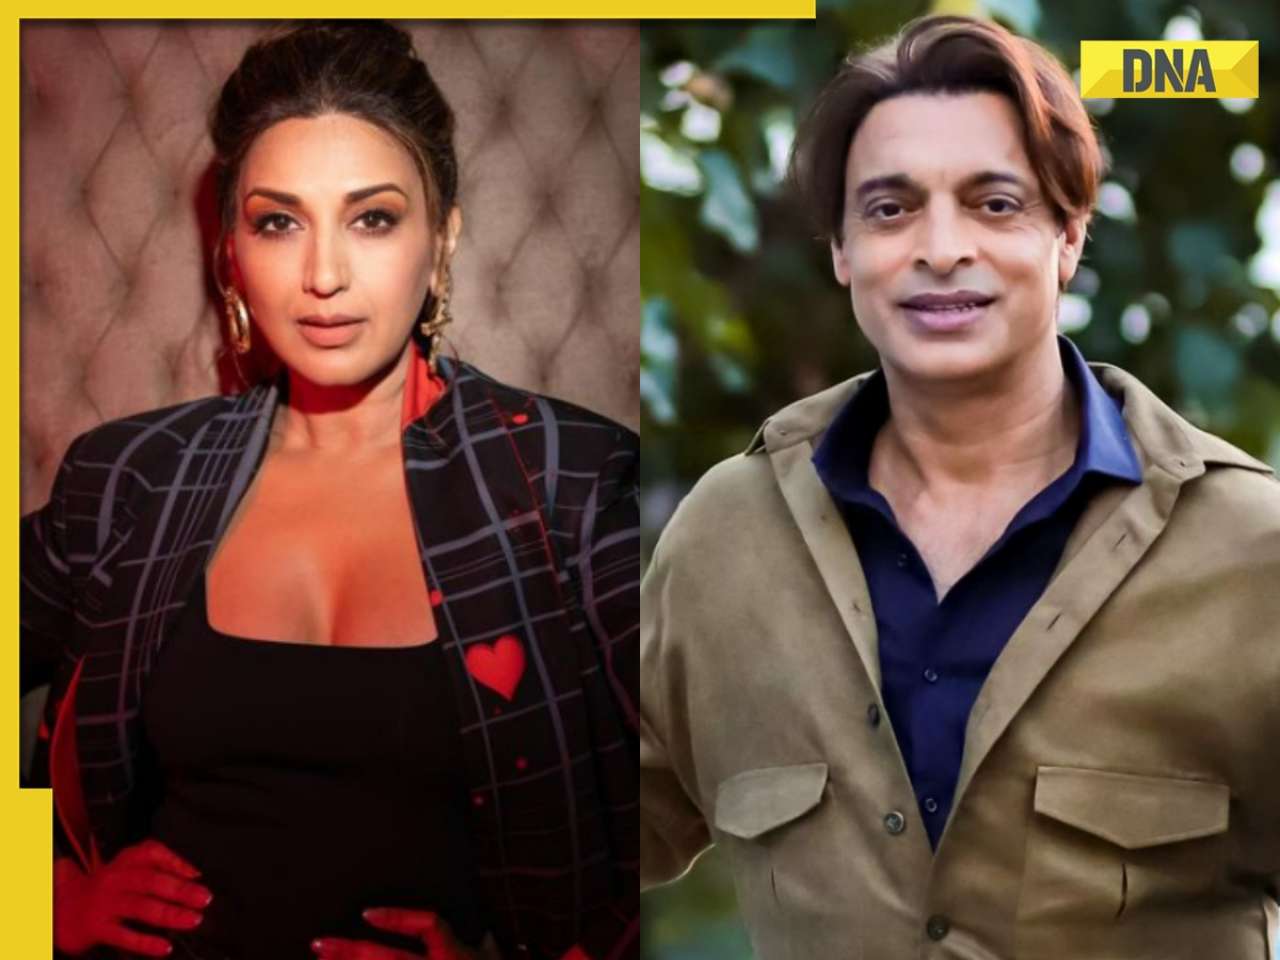 Sonali Bendre reacts to former Pakistani cricketer Shoaib Akhtar's 'kidnap kar lunga' comment: 'I don't know if he...'